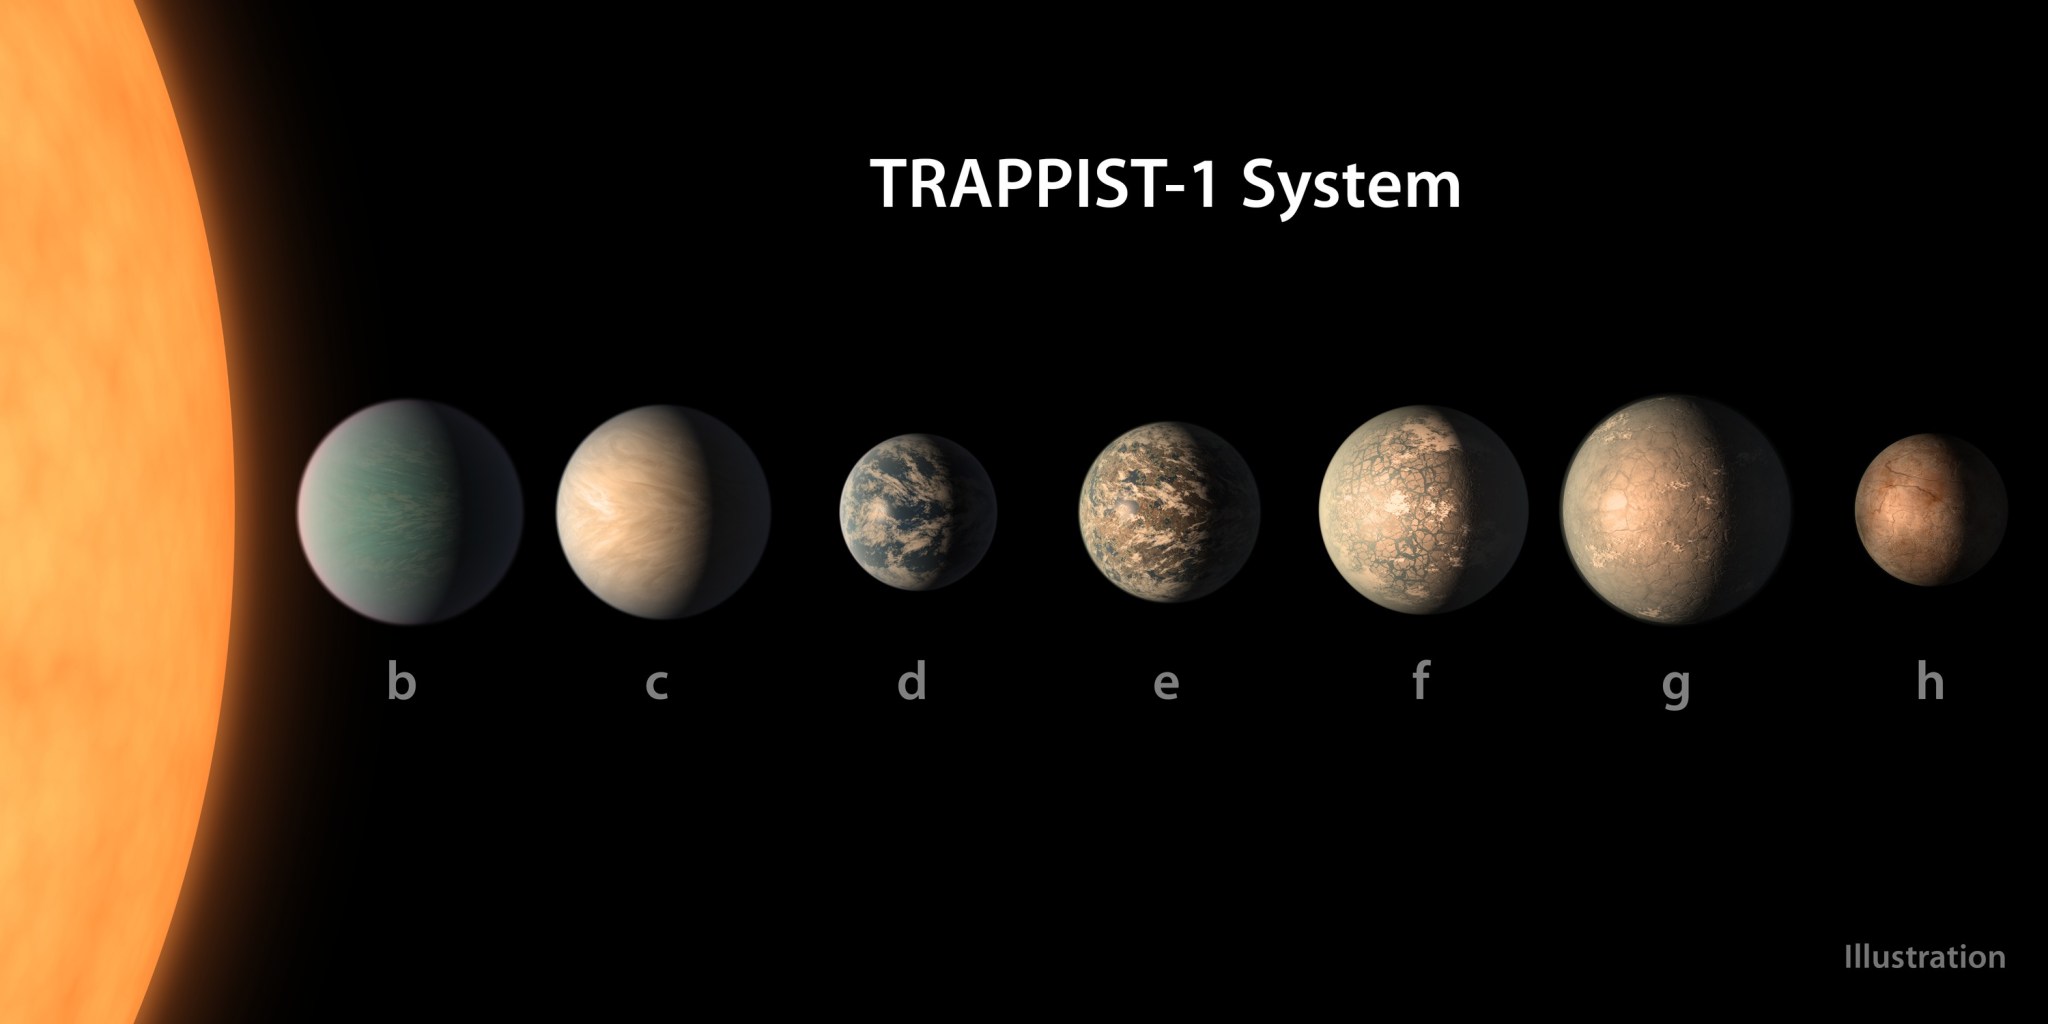 This illustration shows what the TRAPPIST-1 planetary system may look like.